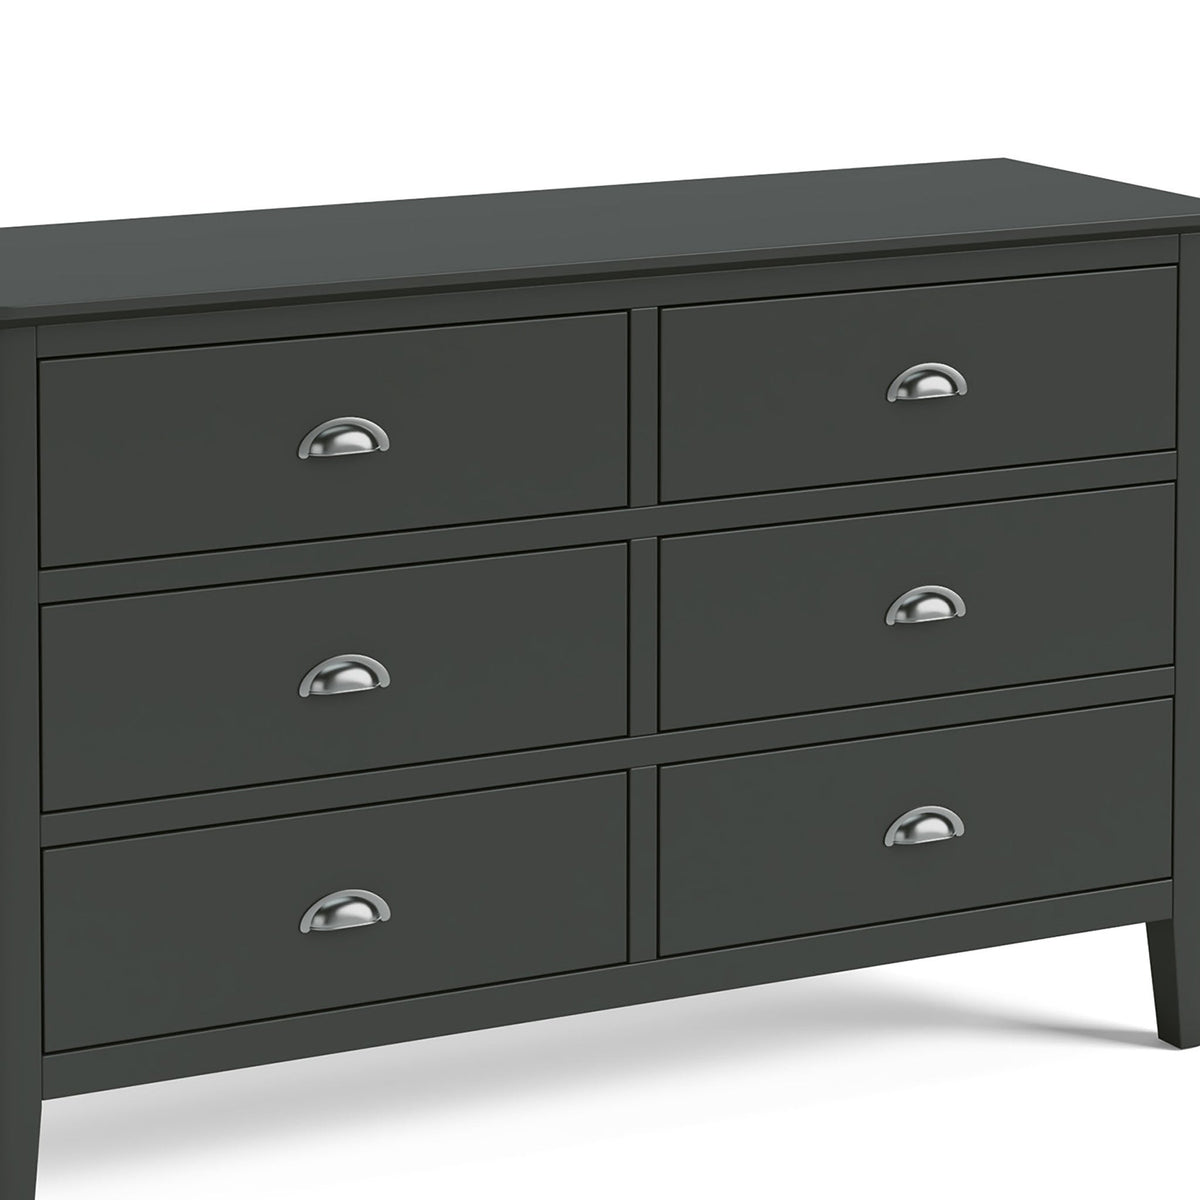 Dumbarton Charcoal Grey 3 over 3 Large Chest of Drawers - Close up of drawer fronts